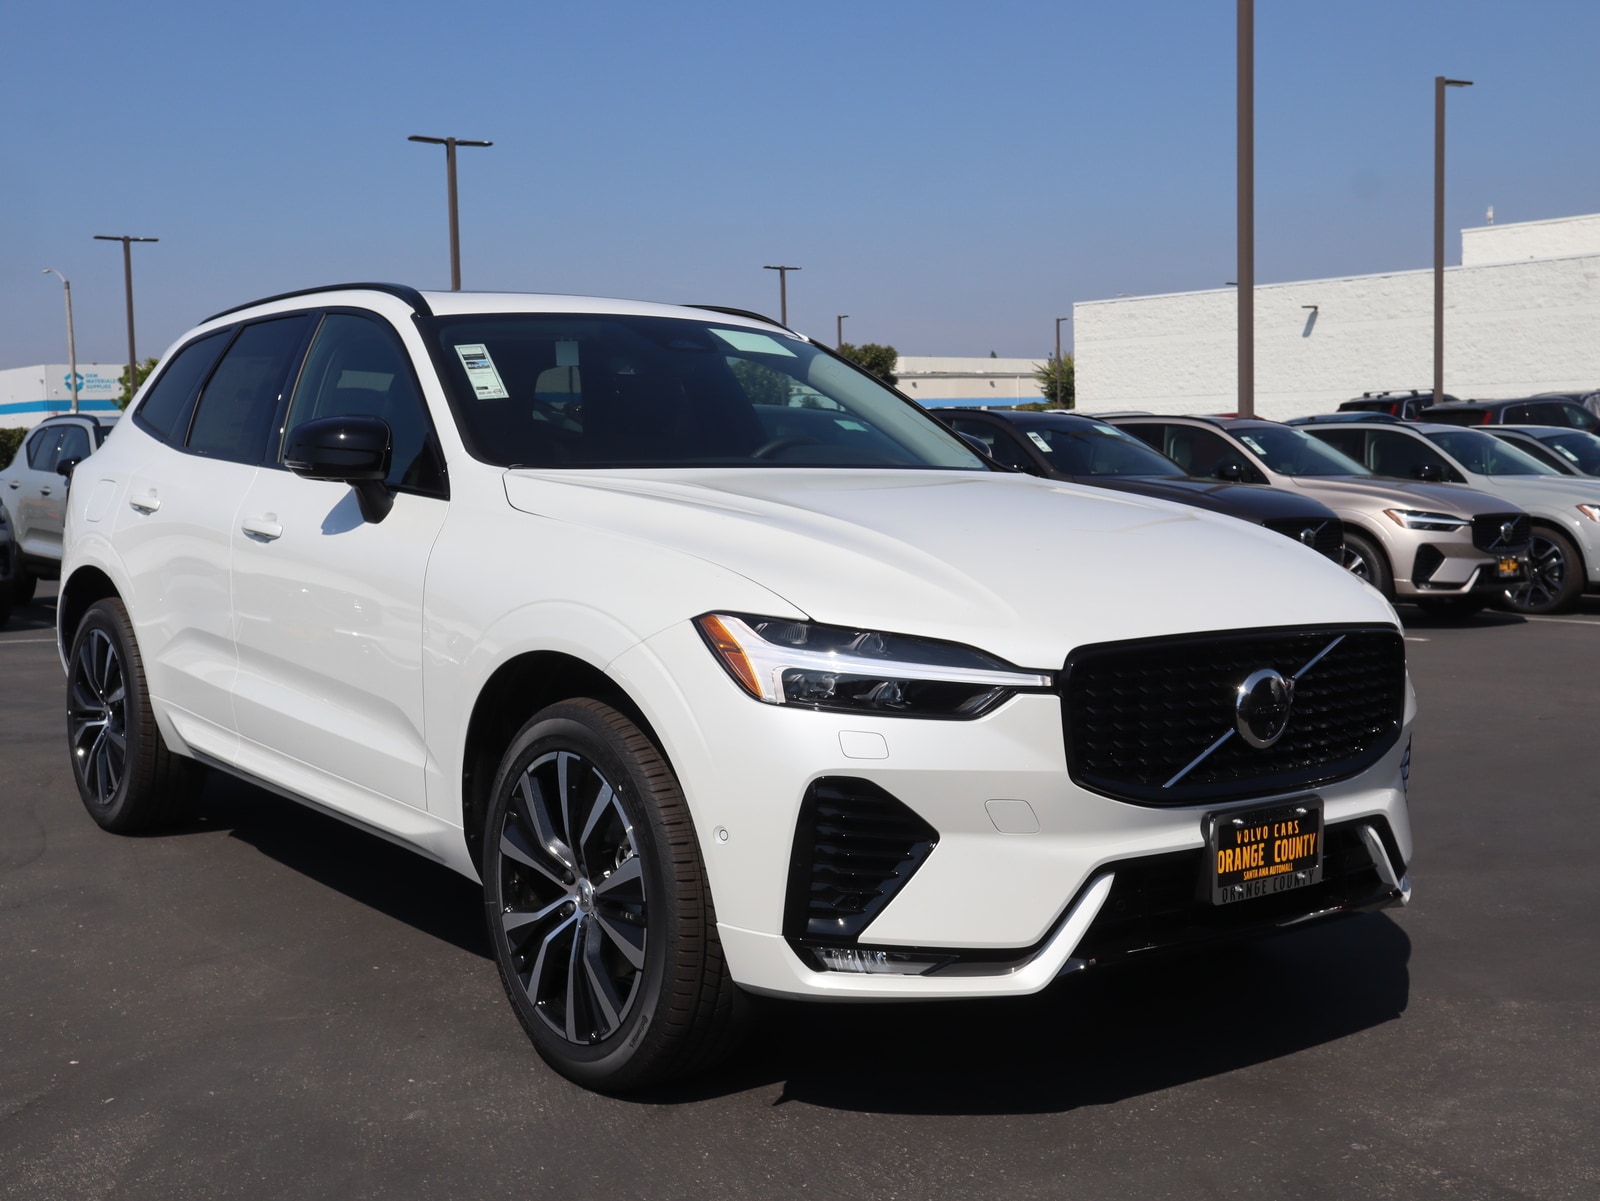 New Volvo SUV | XC60 & XC90 | For Sale in Santa Ana Serving 